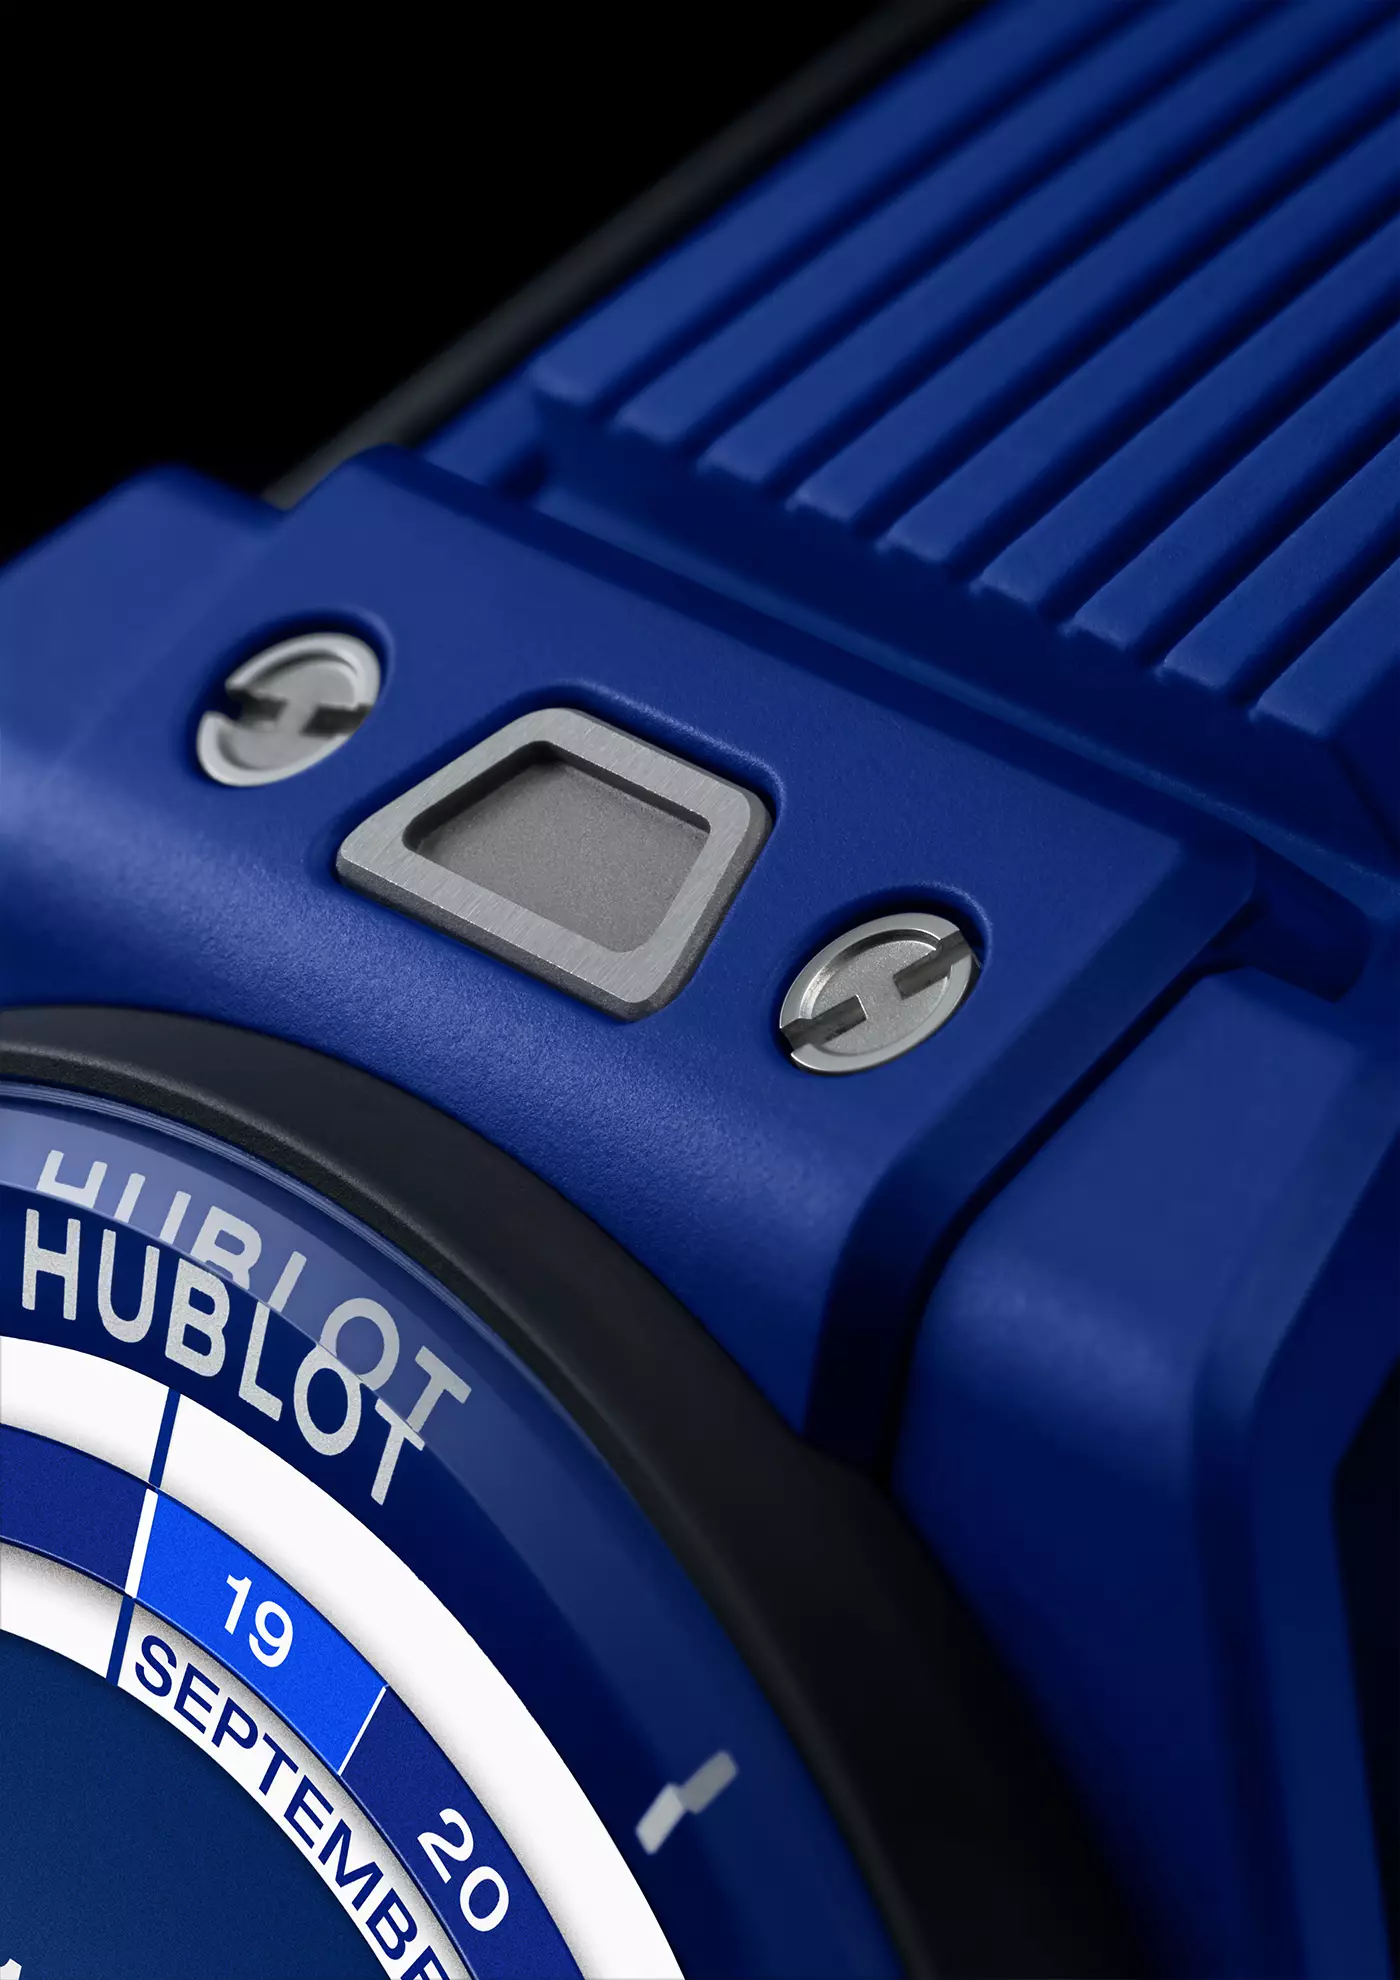 Experience Football Luxury with the Hublot Big Bang UEFA Champions League Gen3